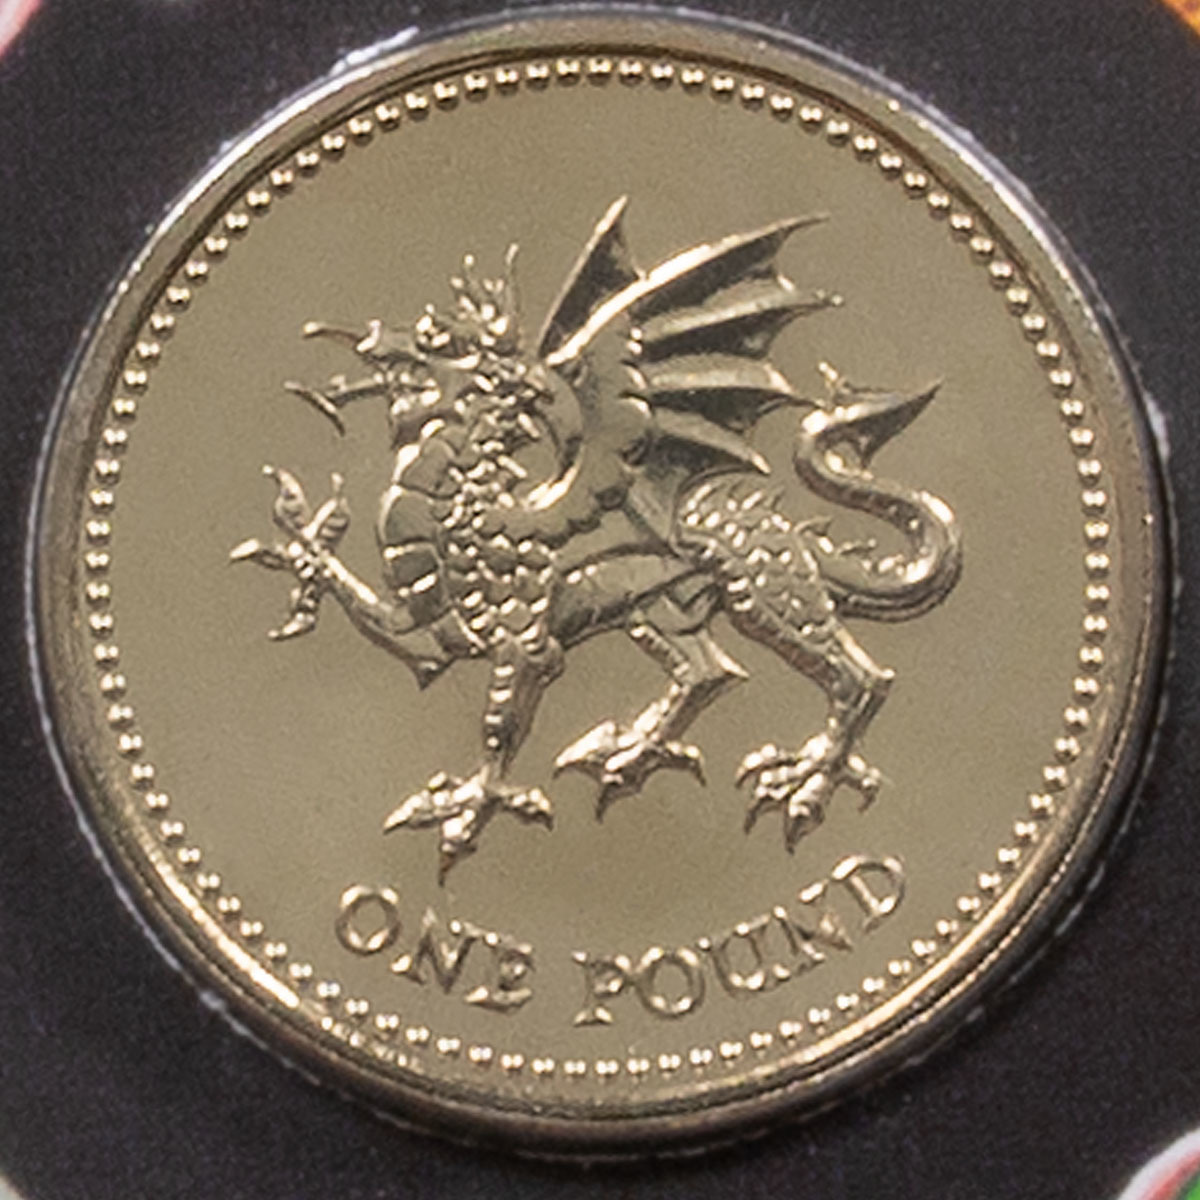 1995-£1-welsh-coin-002-m